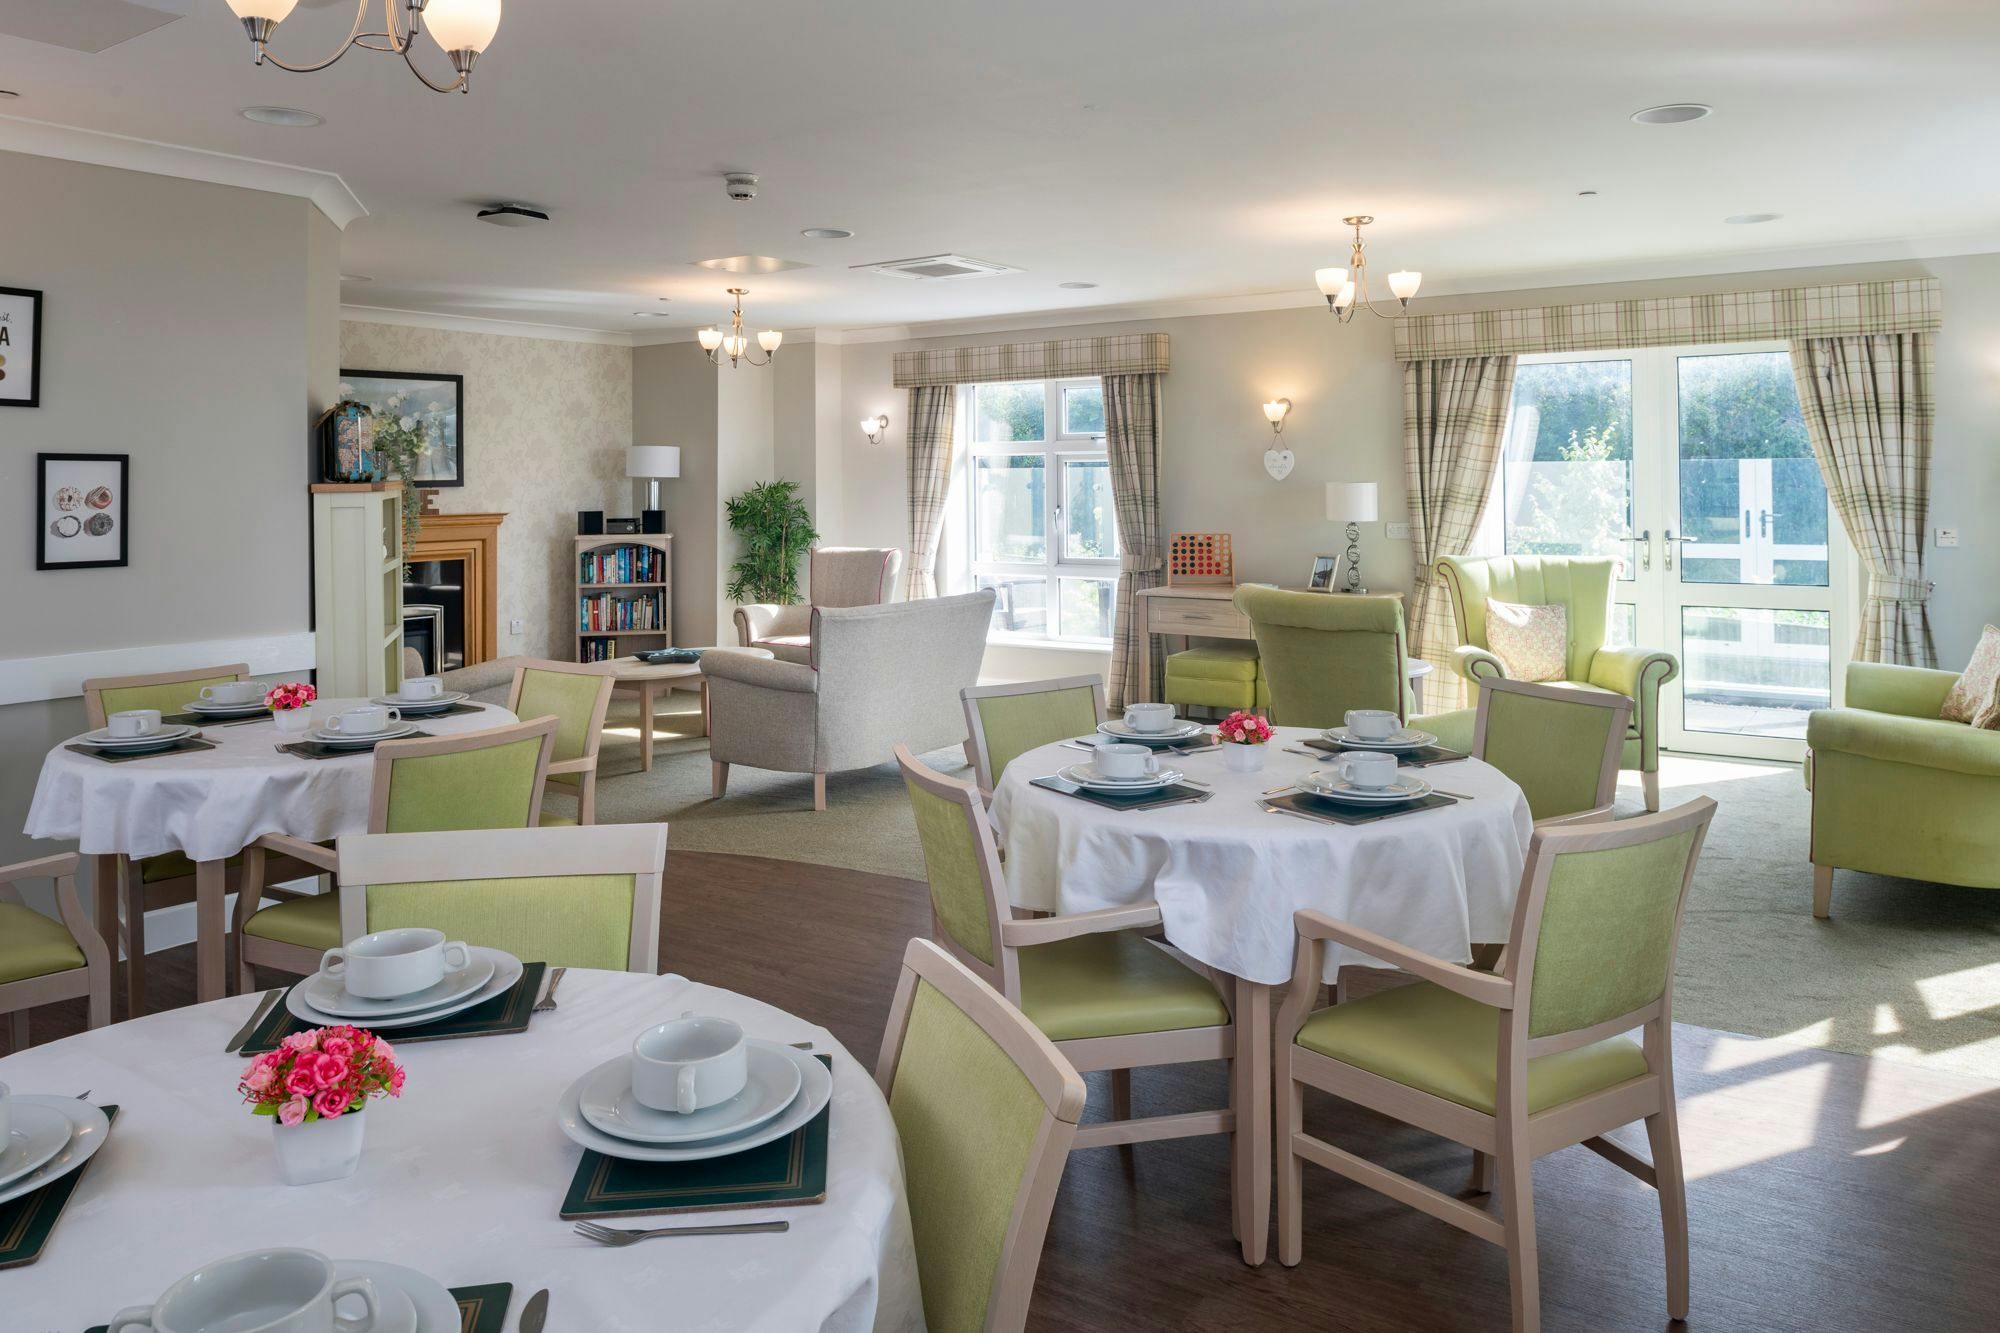 Dining area at Grace Care Home in Thornbury, South Gloucestershire